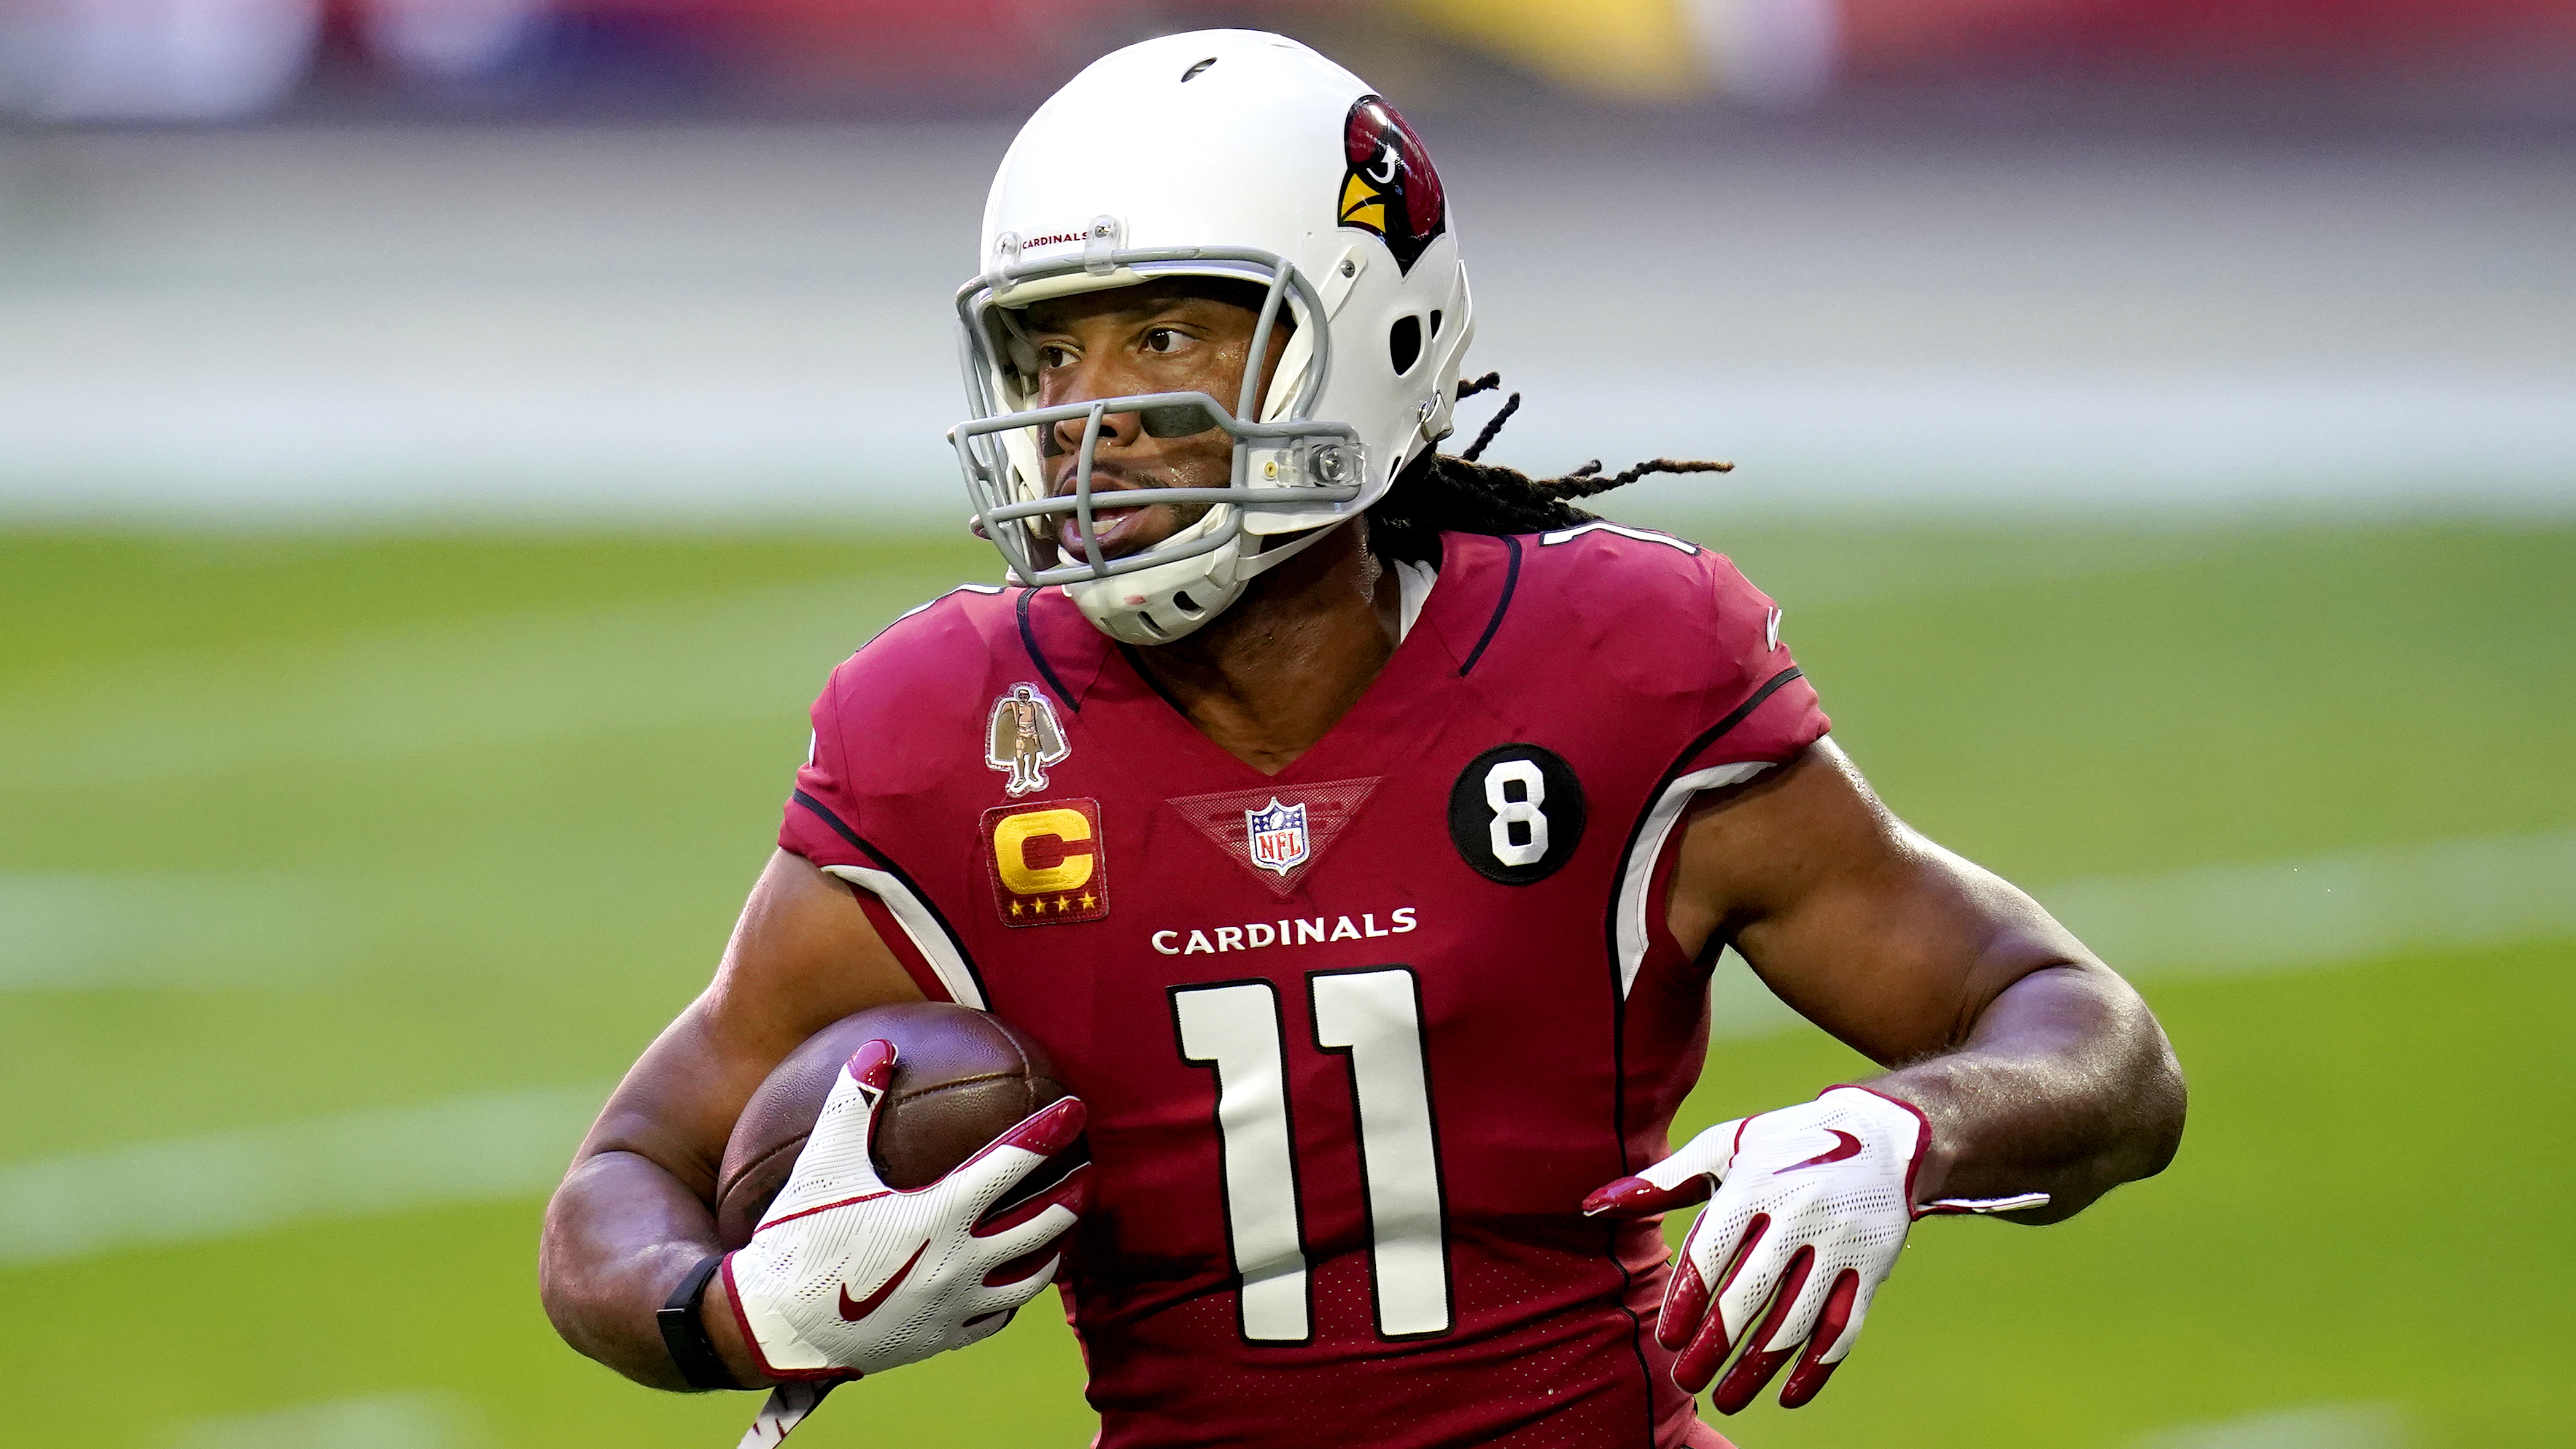 Cardinals receiver Larry Fitzgerald will miss Sunday's game after positive  test - The Boston Globe